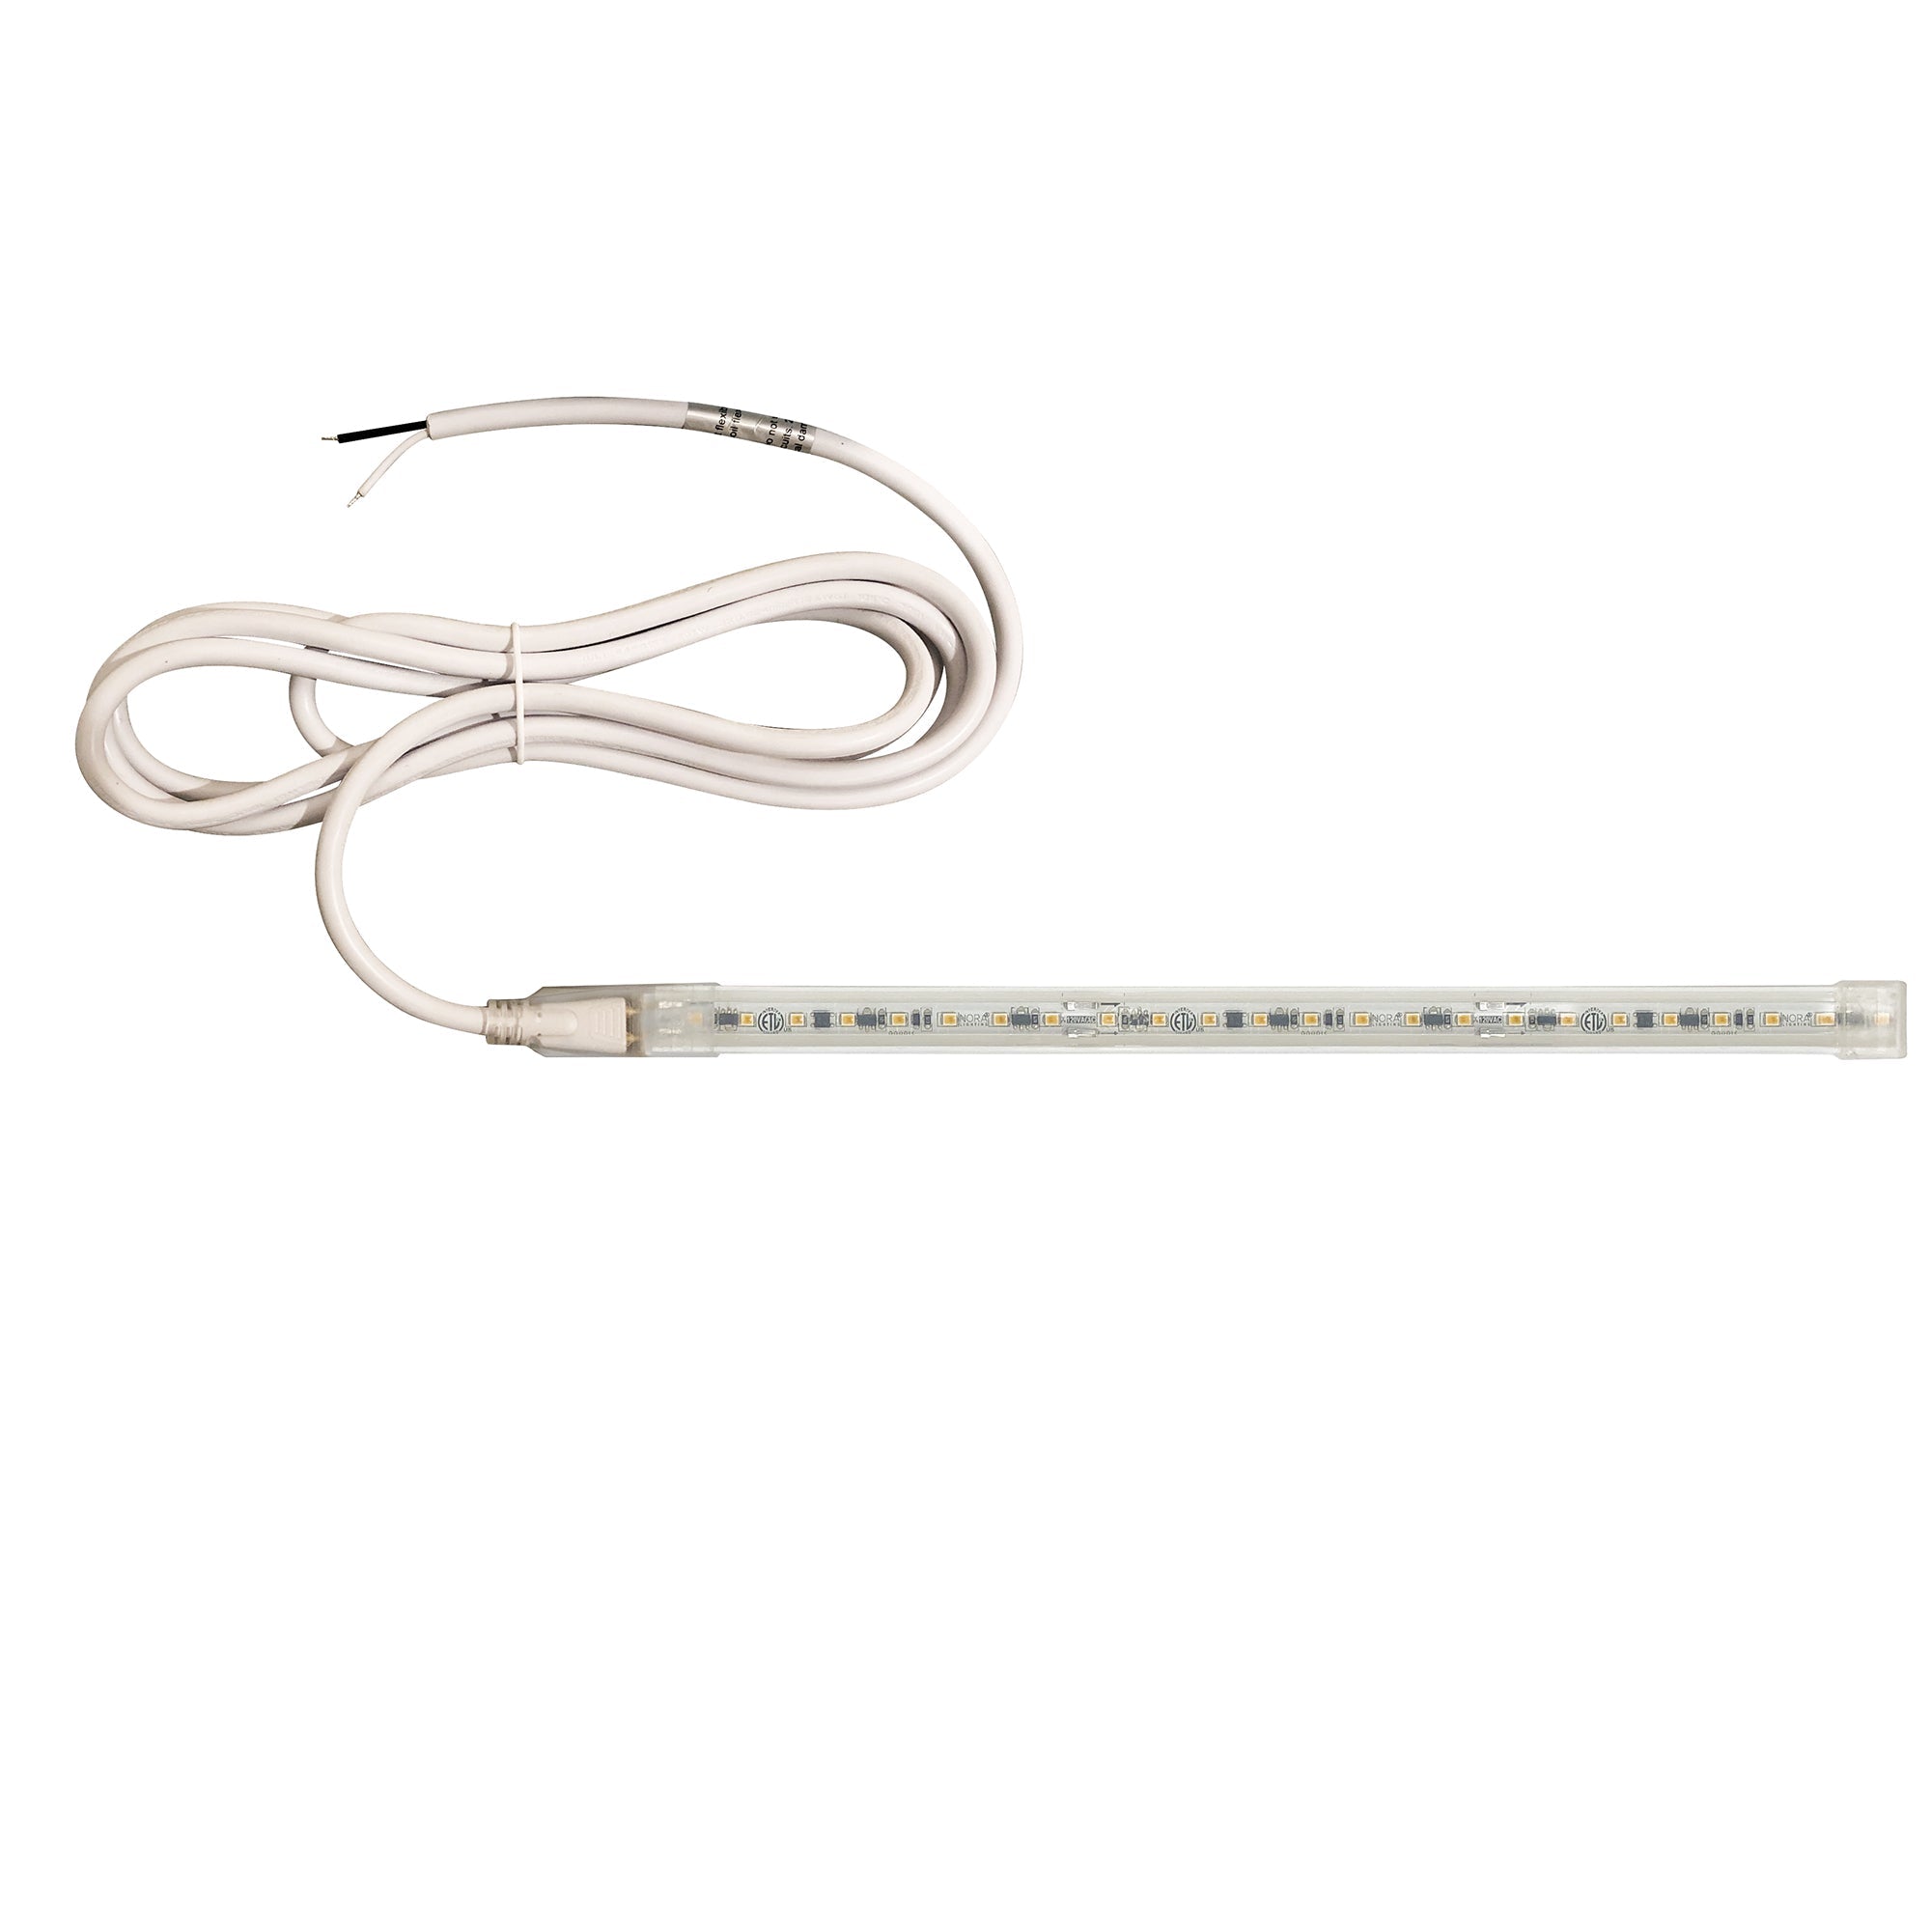 Nora Lighting NUTP13-W83-12-940/HW - Accent / Undercabinet - Custom Cut 83-ft 120V Continuous LED Tape Light, 330lm / 3.6W per foot, 4000K, w/ Mounting Clips and 8' Hardwired Power Cord